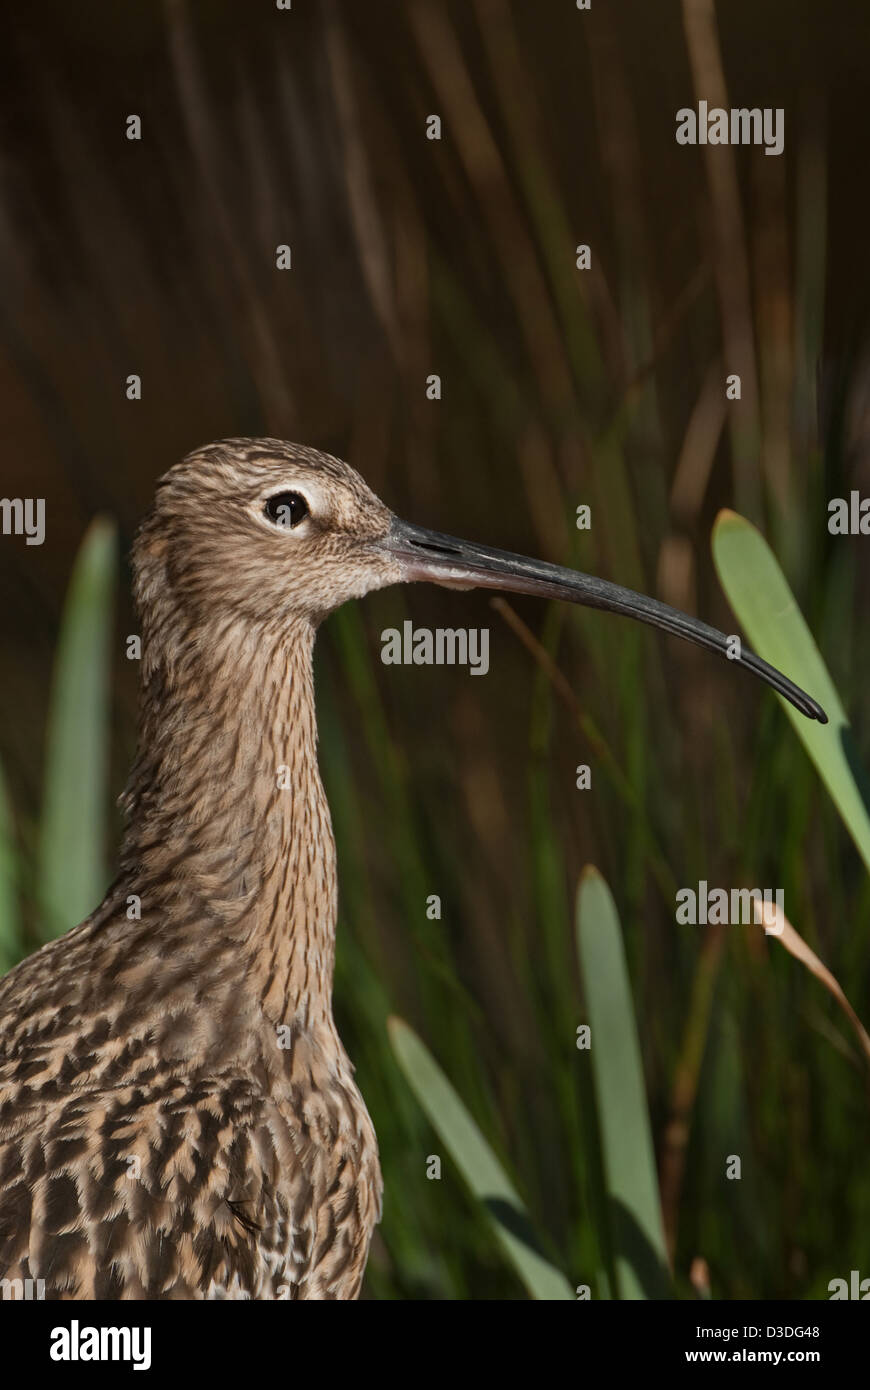 Adult Curlew close-up of head and neck Stock Photo